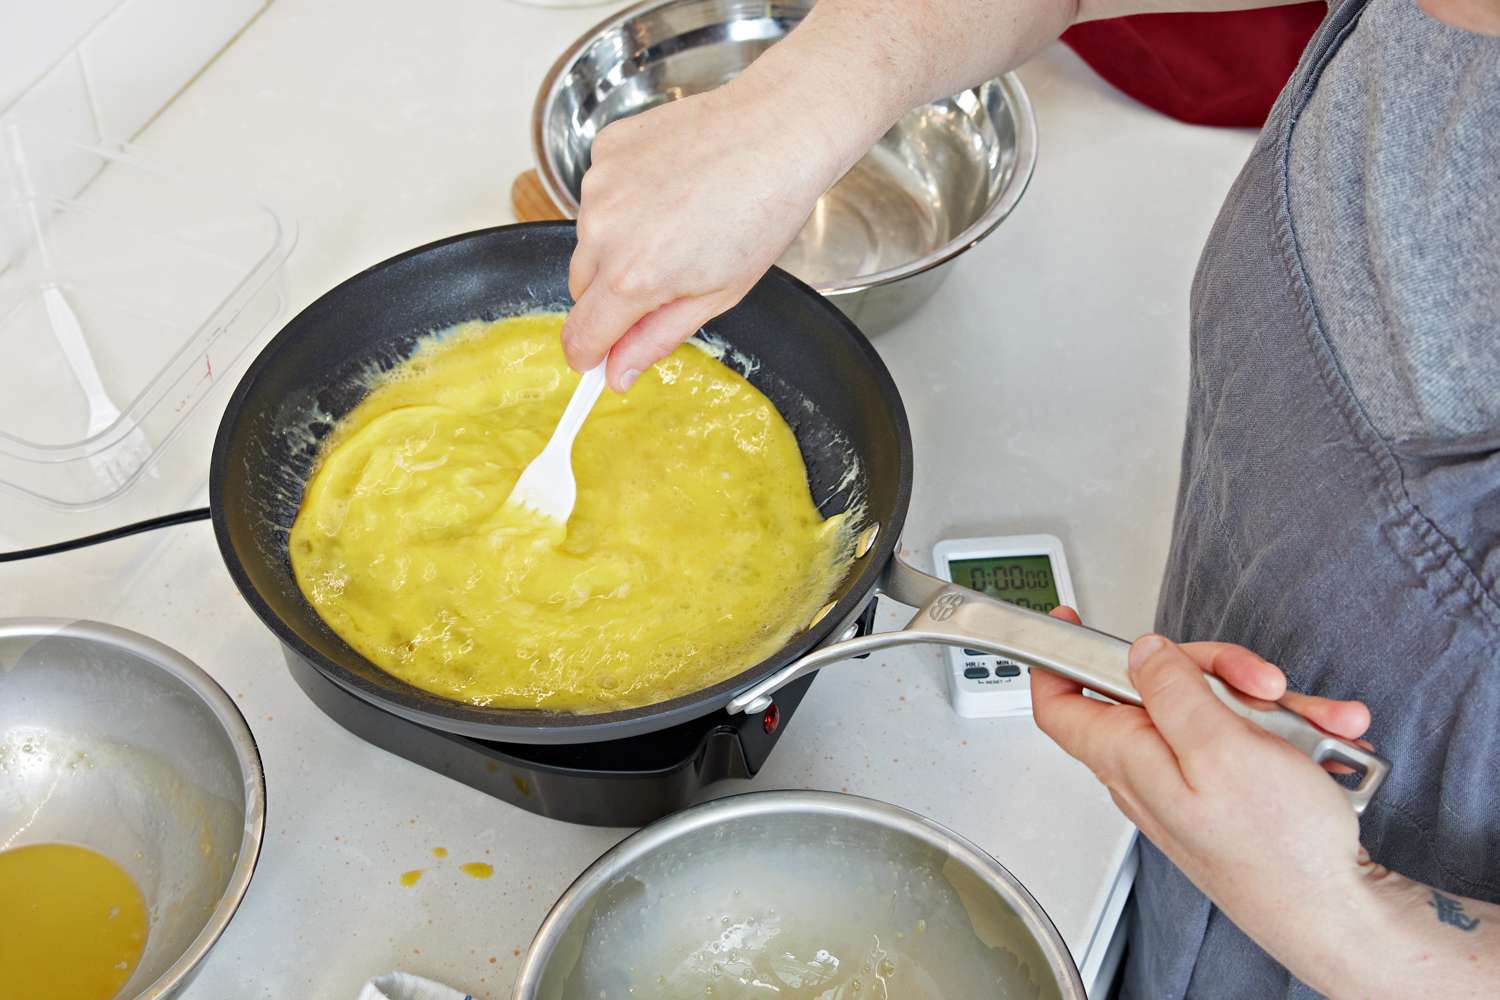 Omelet being made in a pan from the Calphalon Signature Nonstick 10-Piece Cookware Set